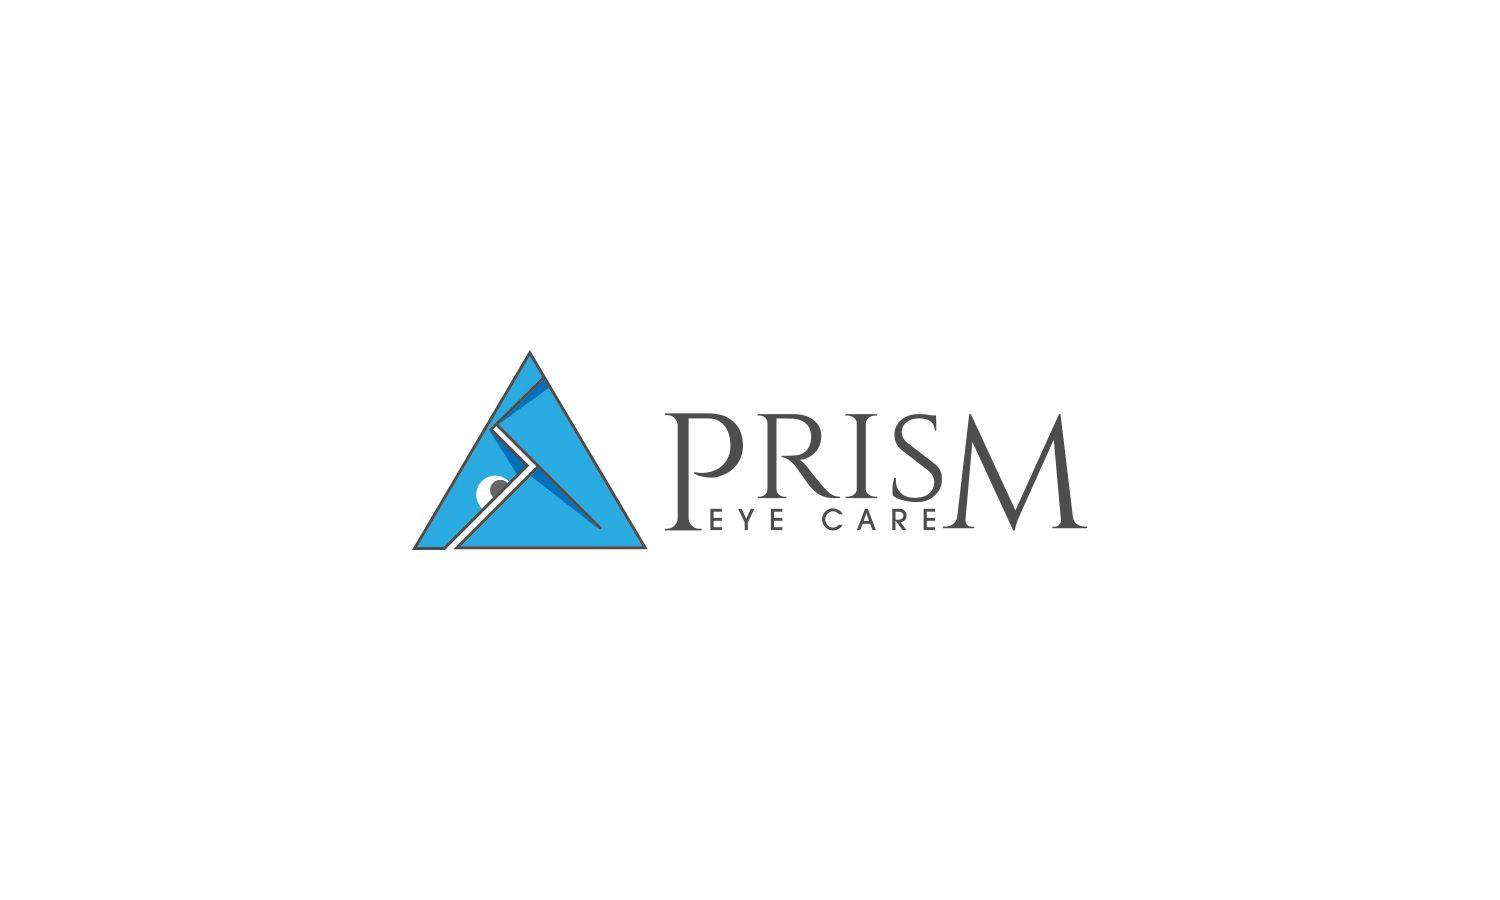 Eye Triangle Physiciqns Logo - Serious, Professional, Doctor Logo Design for Prism Eye Care by ...